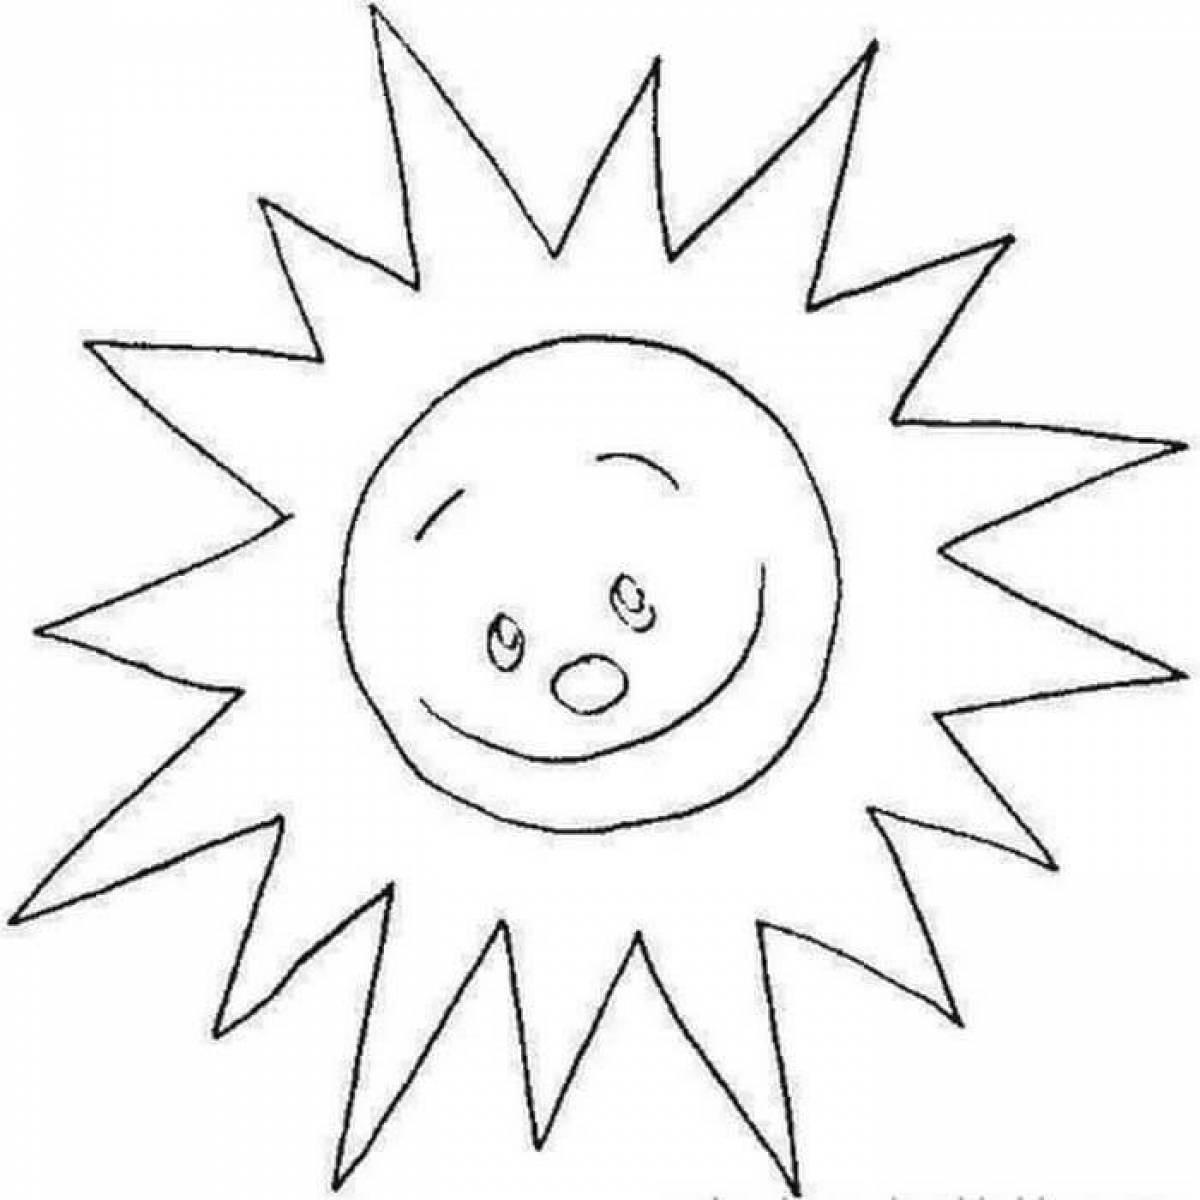 Great sunshine coloring book for kids